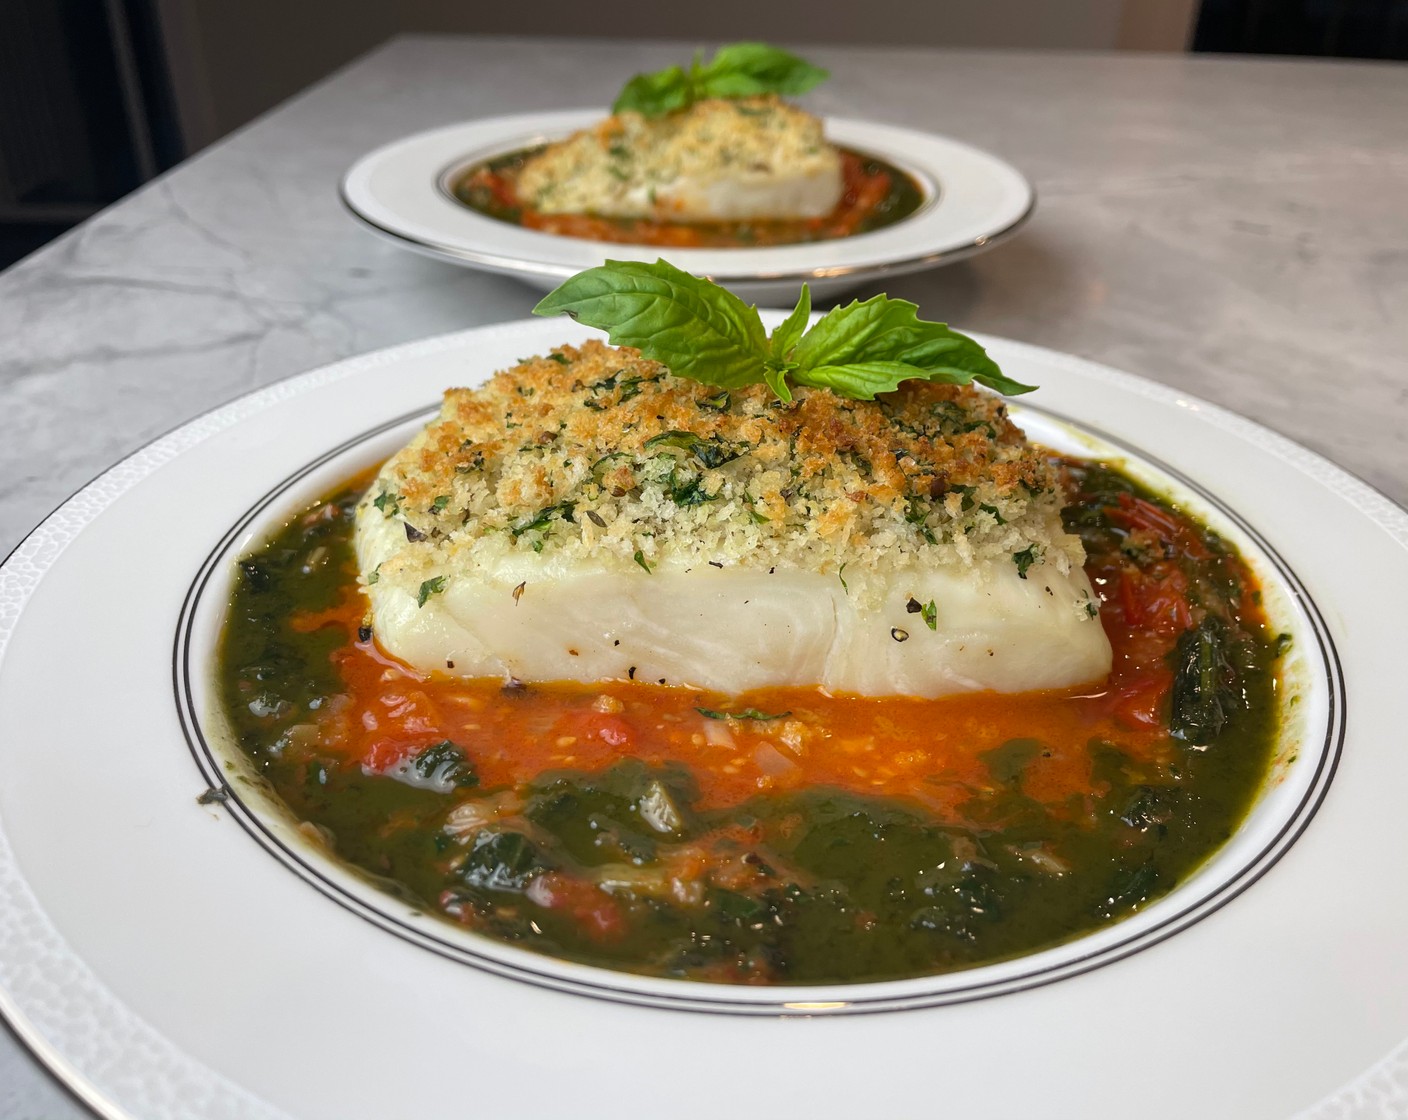 Panko Crusted Halibut in a Tomato, Fennel, Basil Sauce